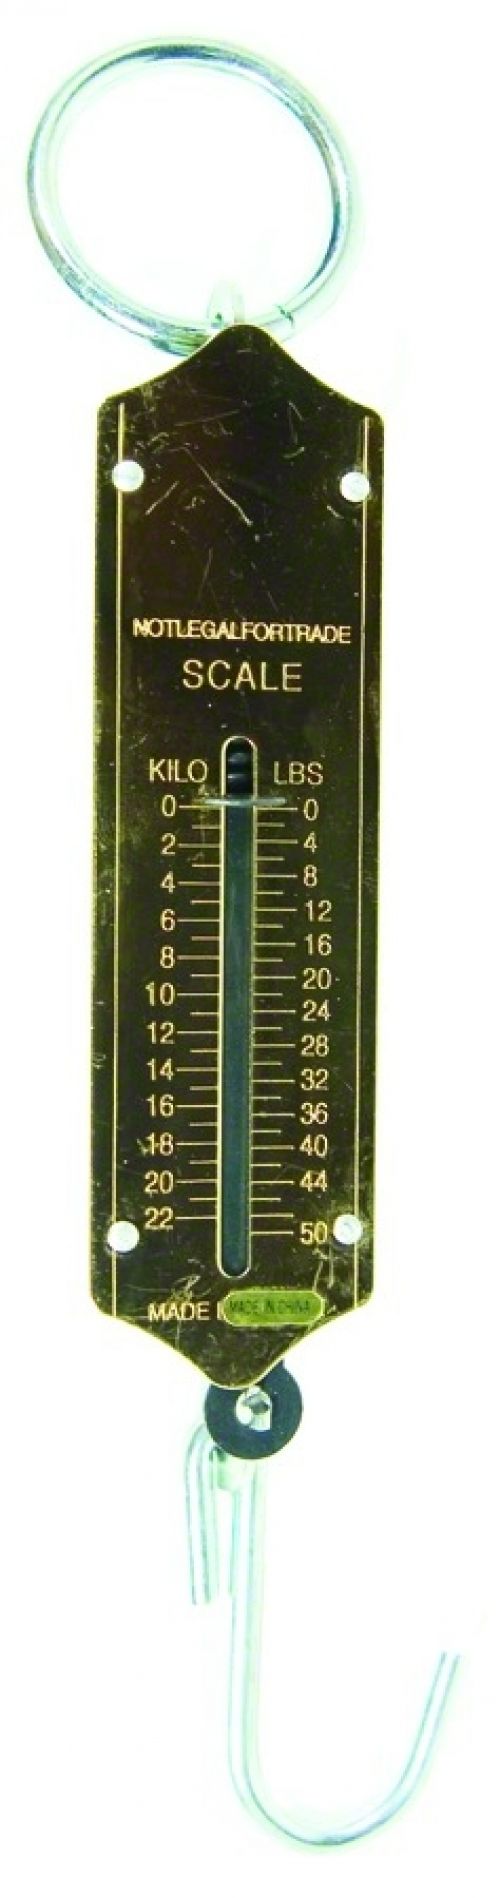 50 Pound Spring Scale